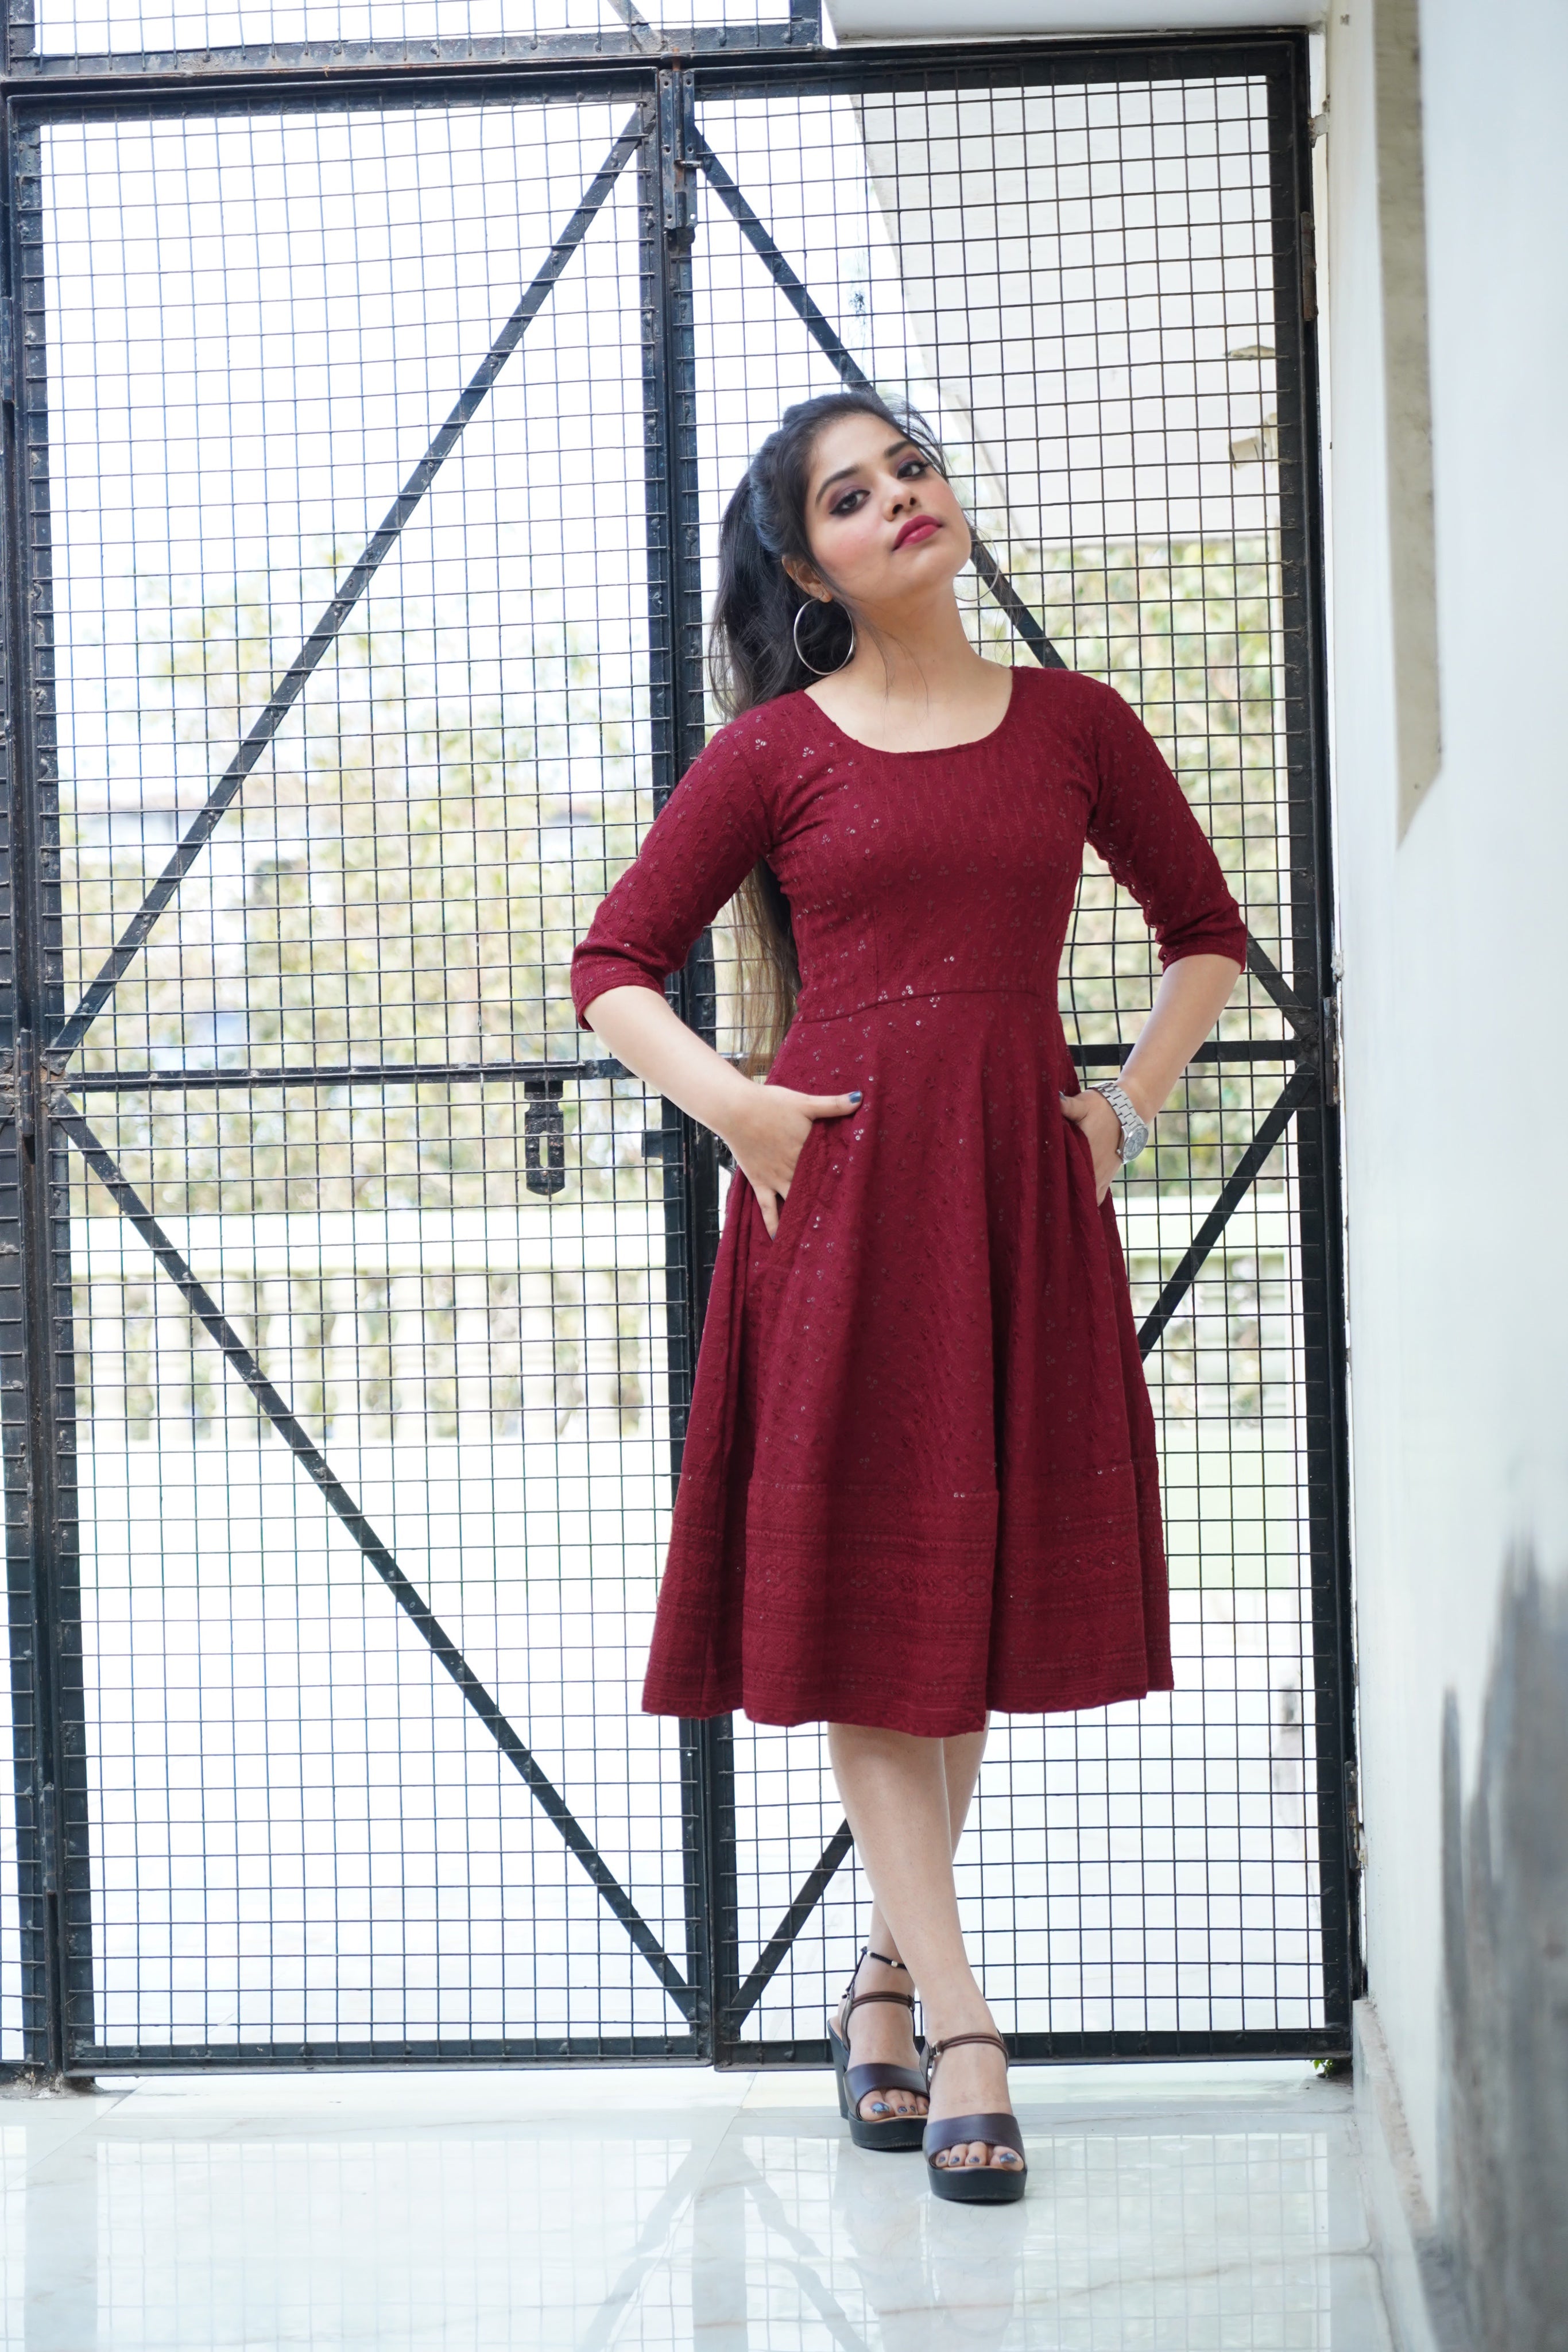 Elegant maroon rayon dress featuring intricate Lucknowi Chikankari embroidery, perfect for parties and special occasions.